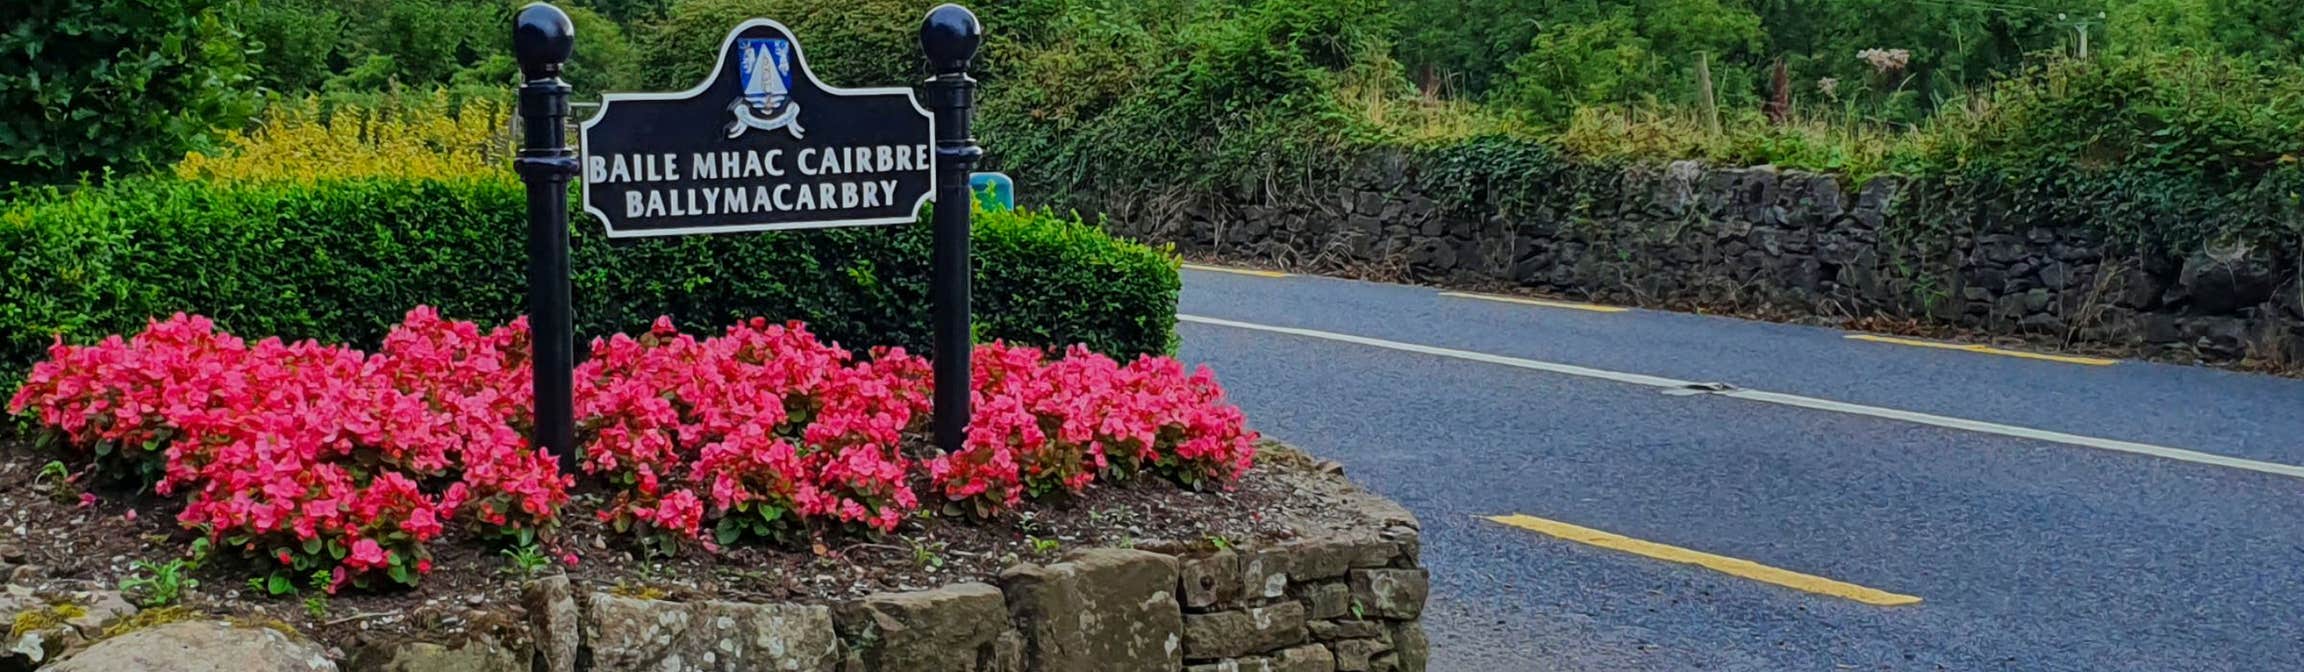 Image of a sign in Ballymacarbry in County Waterford